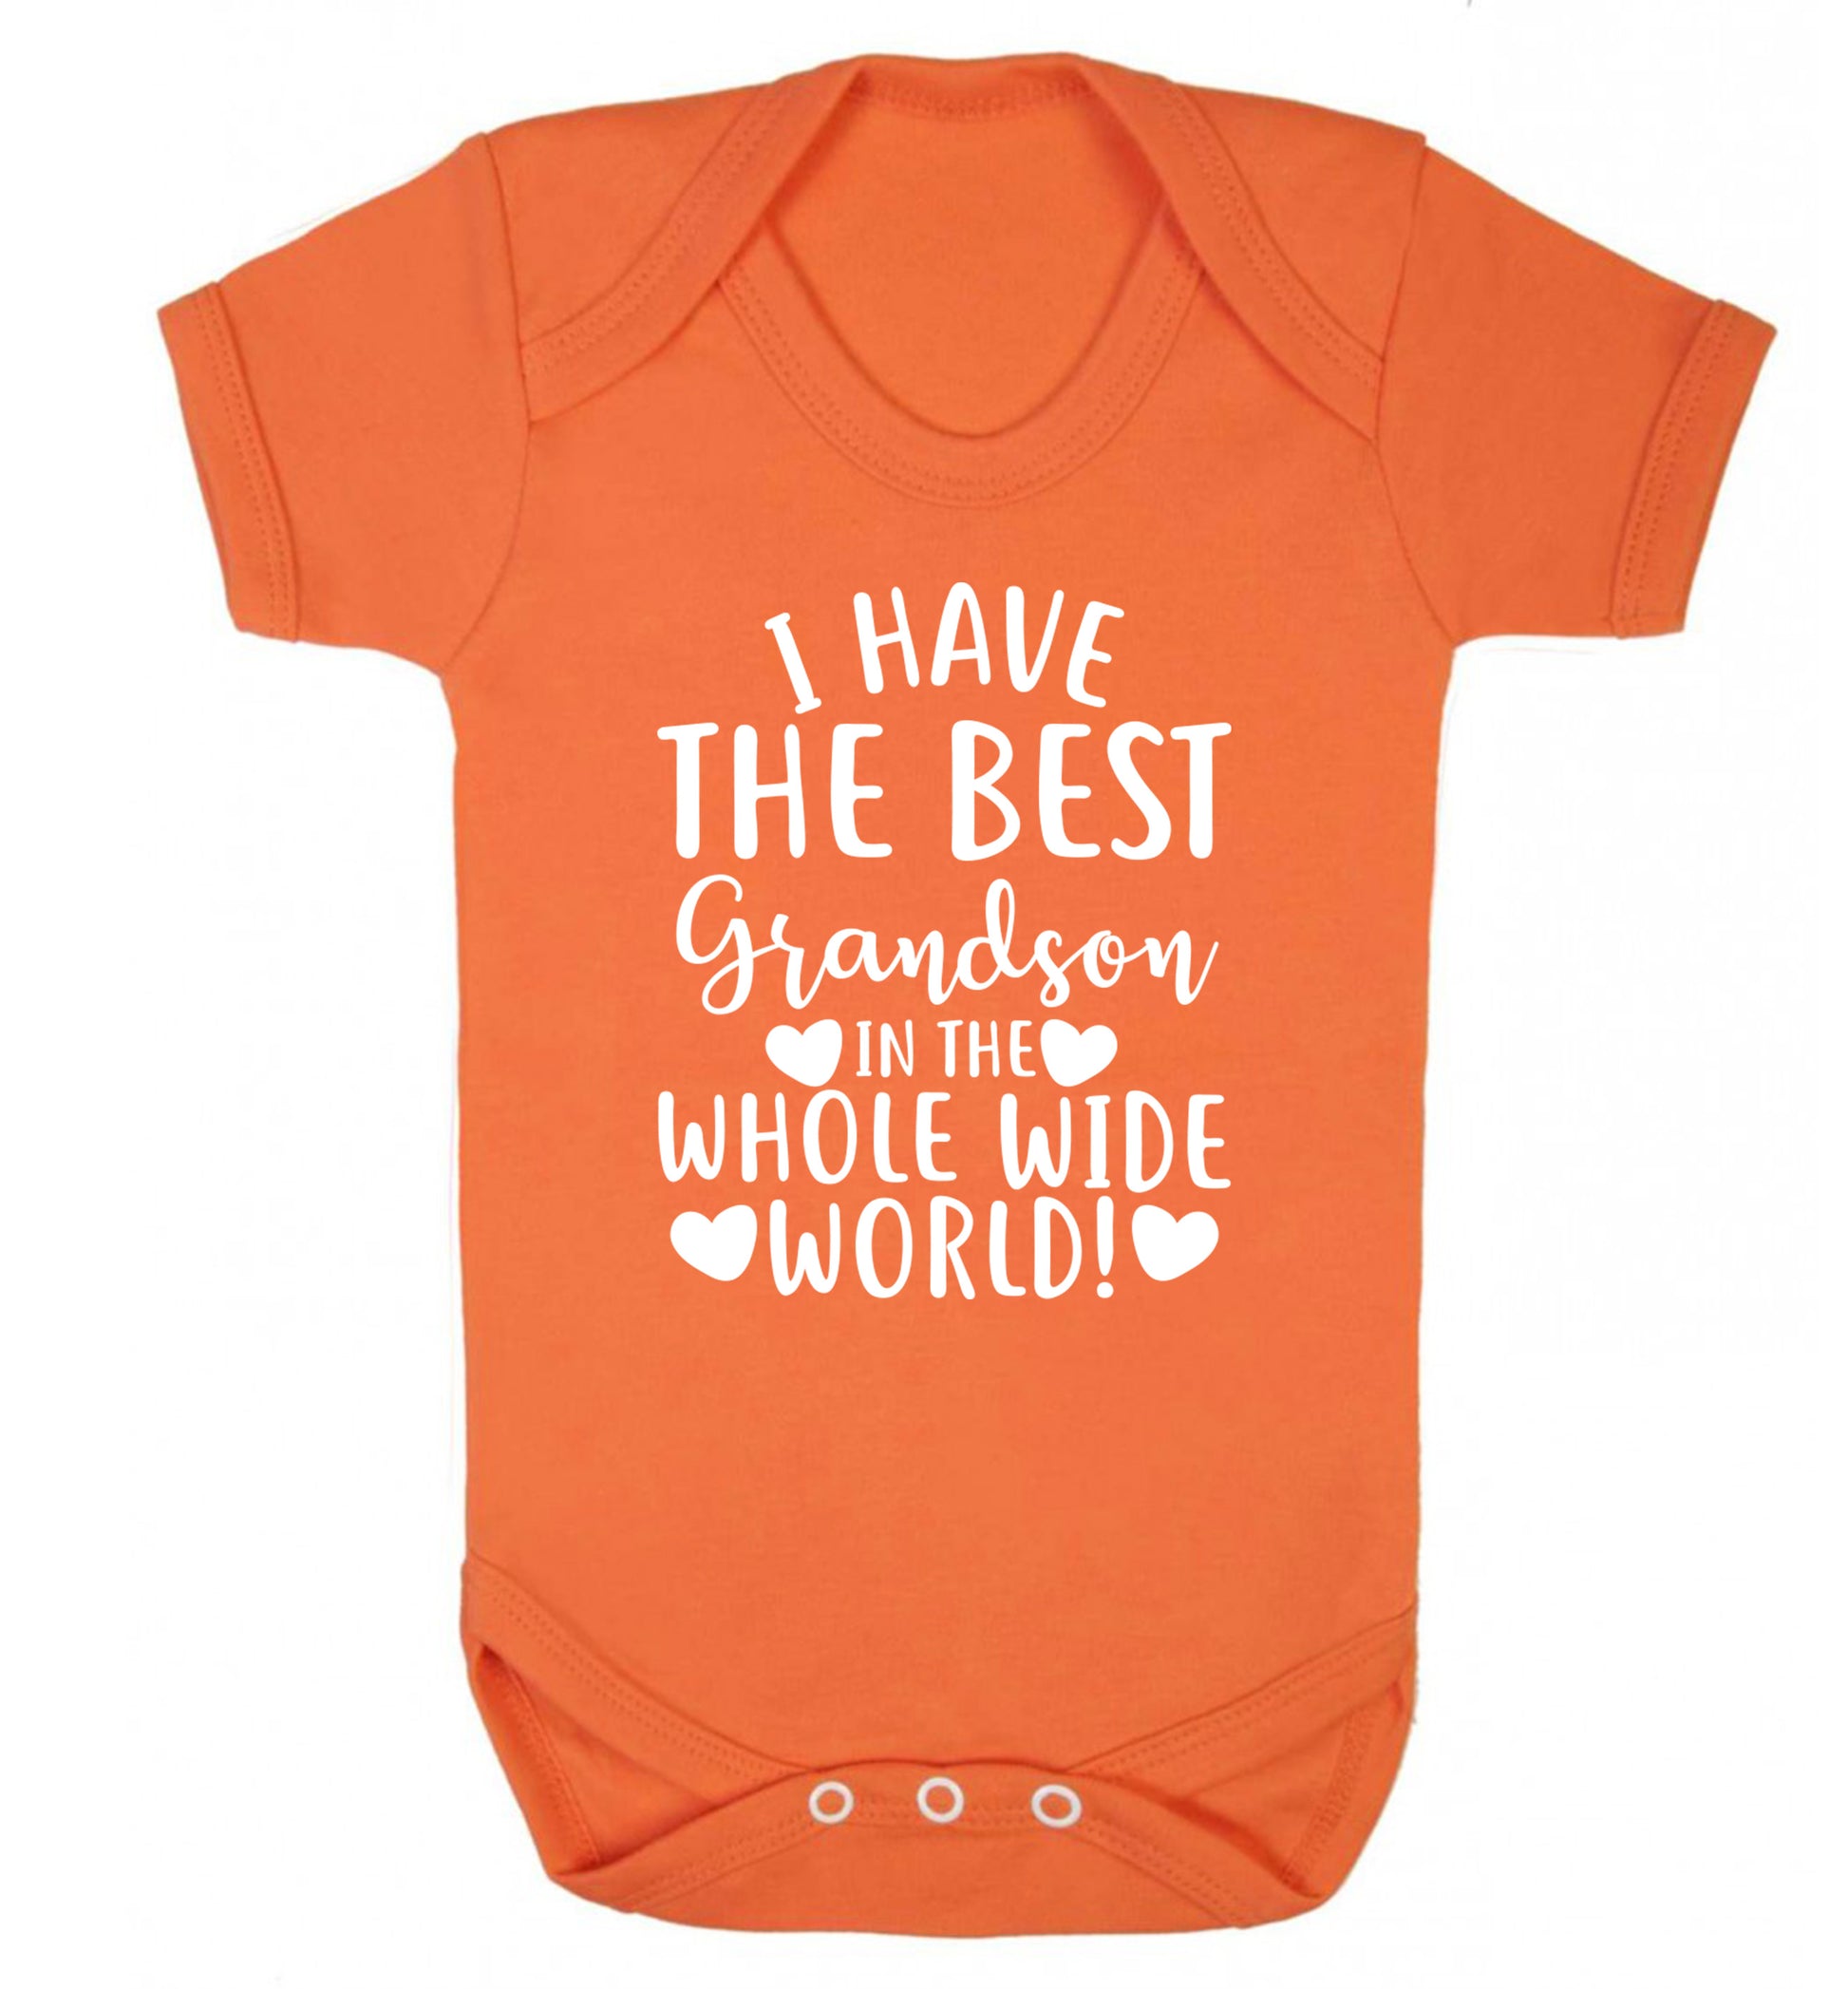 I have the best grandson in the whole wide world! Baby Vest orange 18-24 months